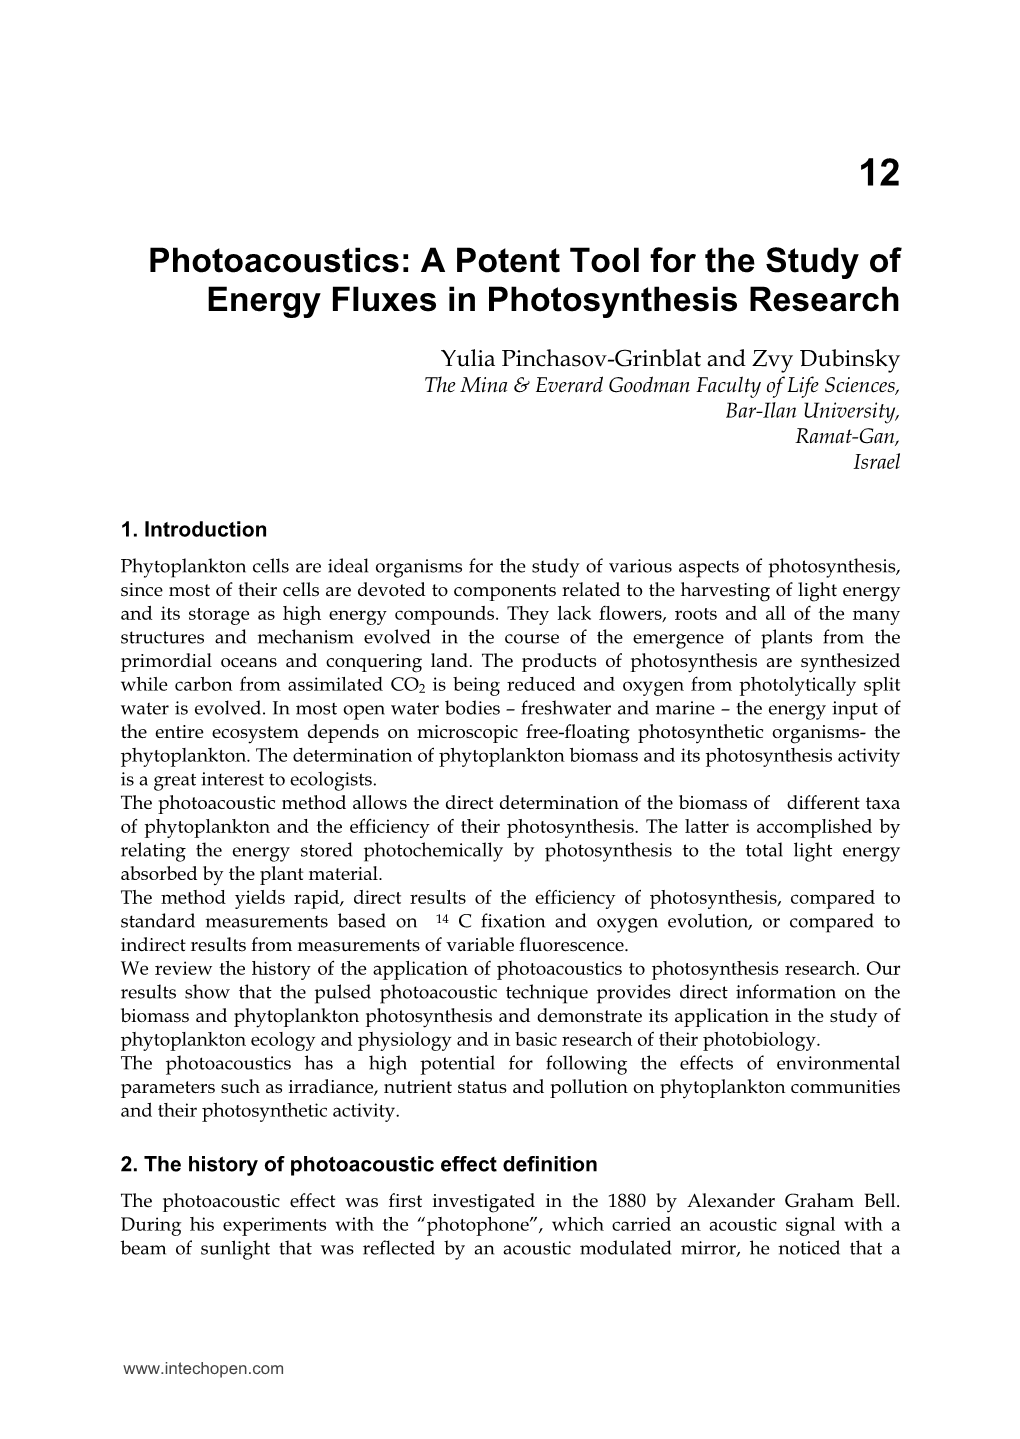 Photoacoustics: a Potent Tool for the Study of Energy Fluxes in Photosynthesis Research